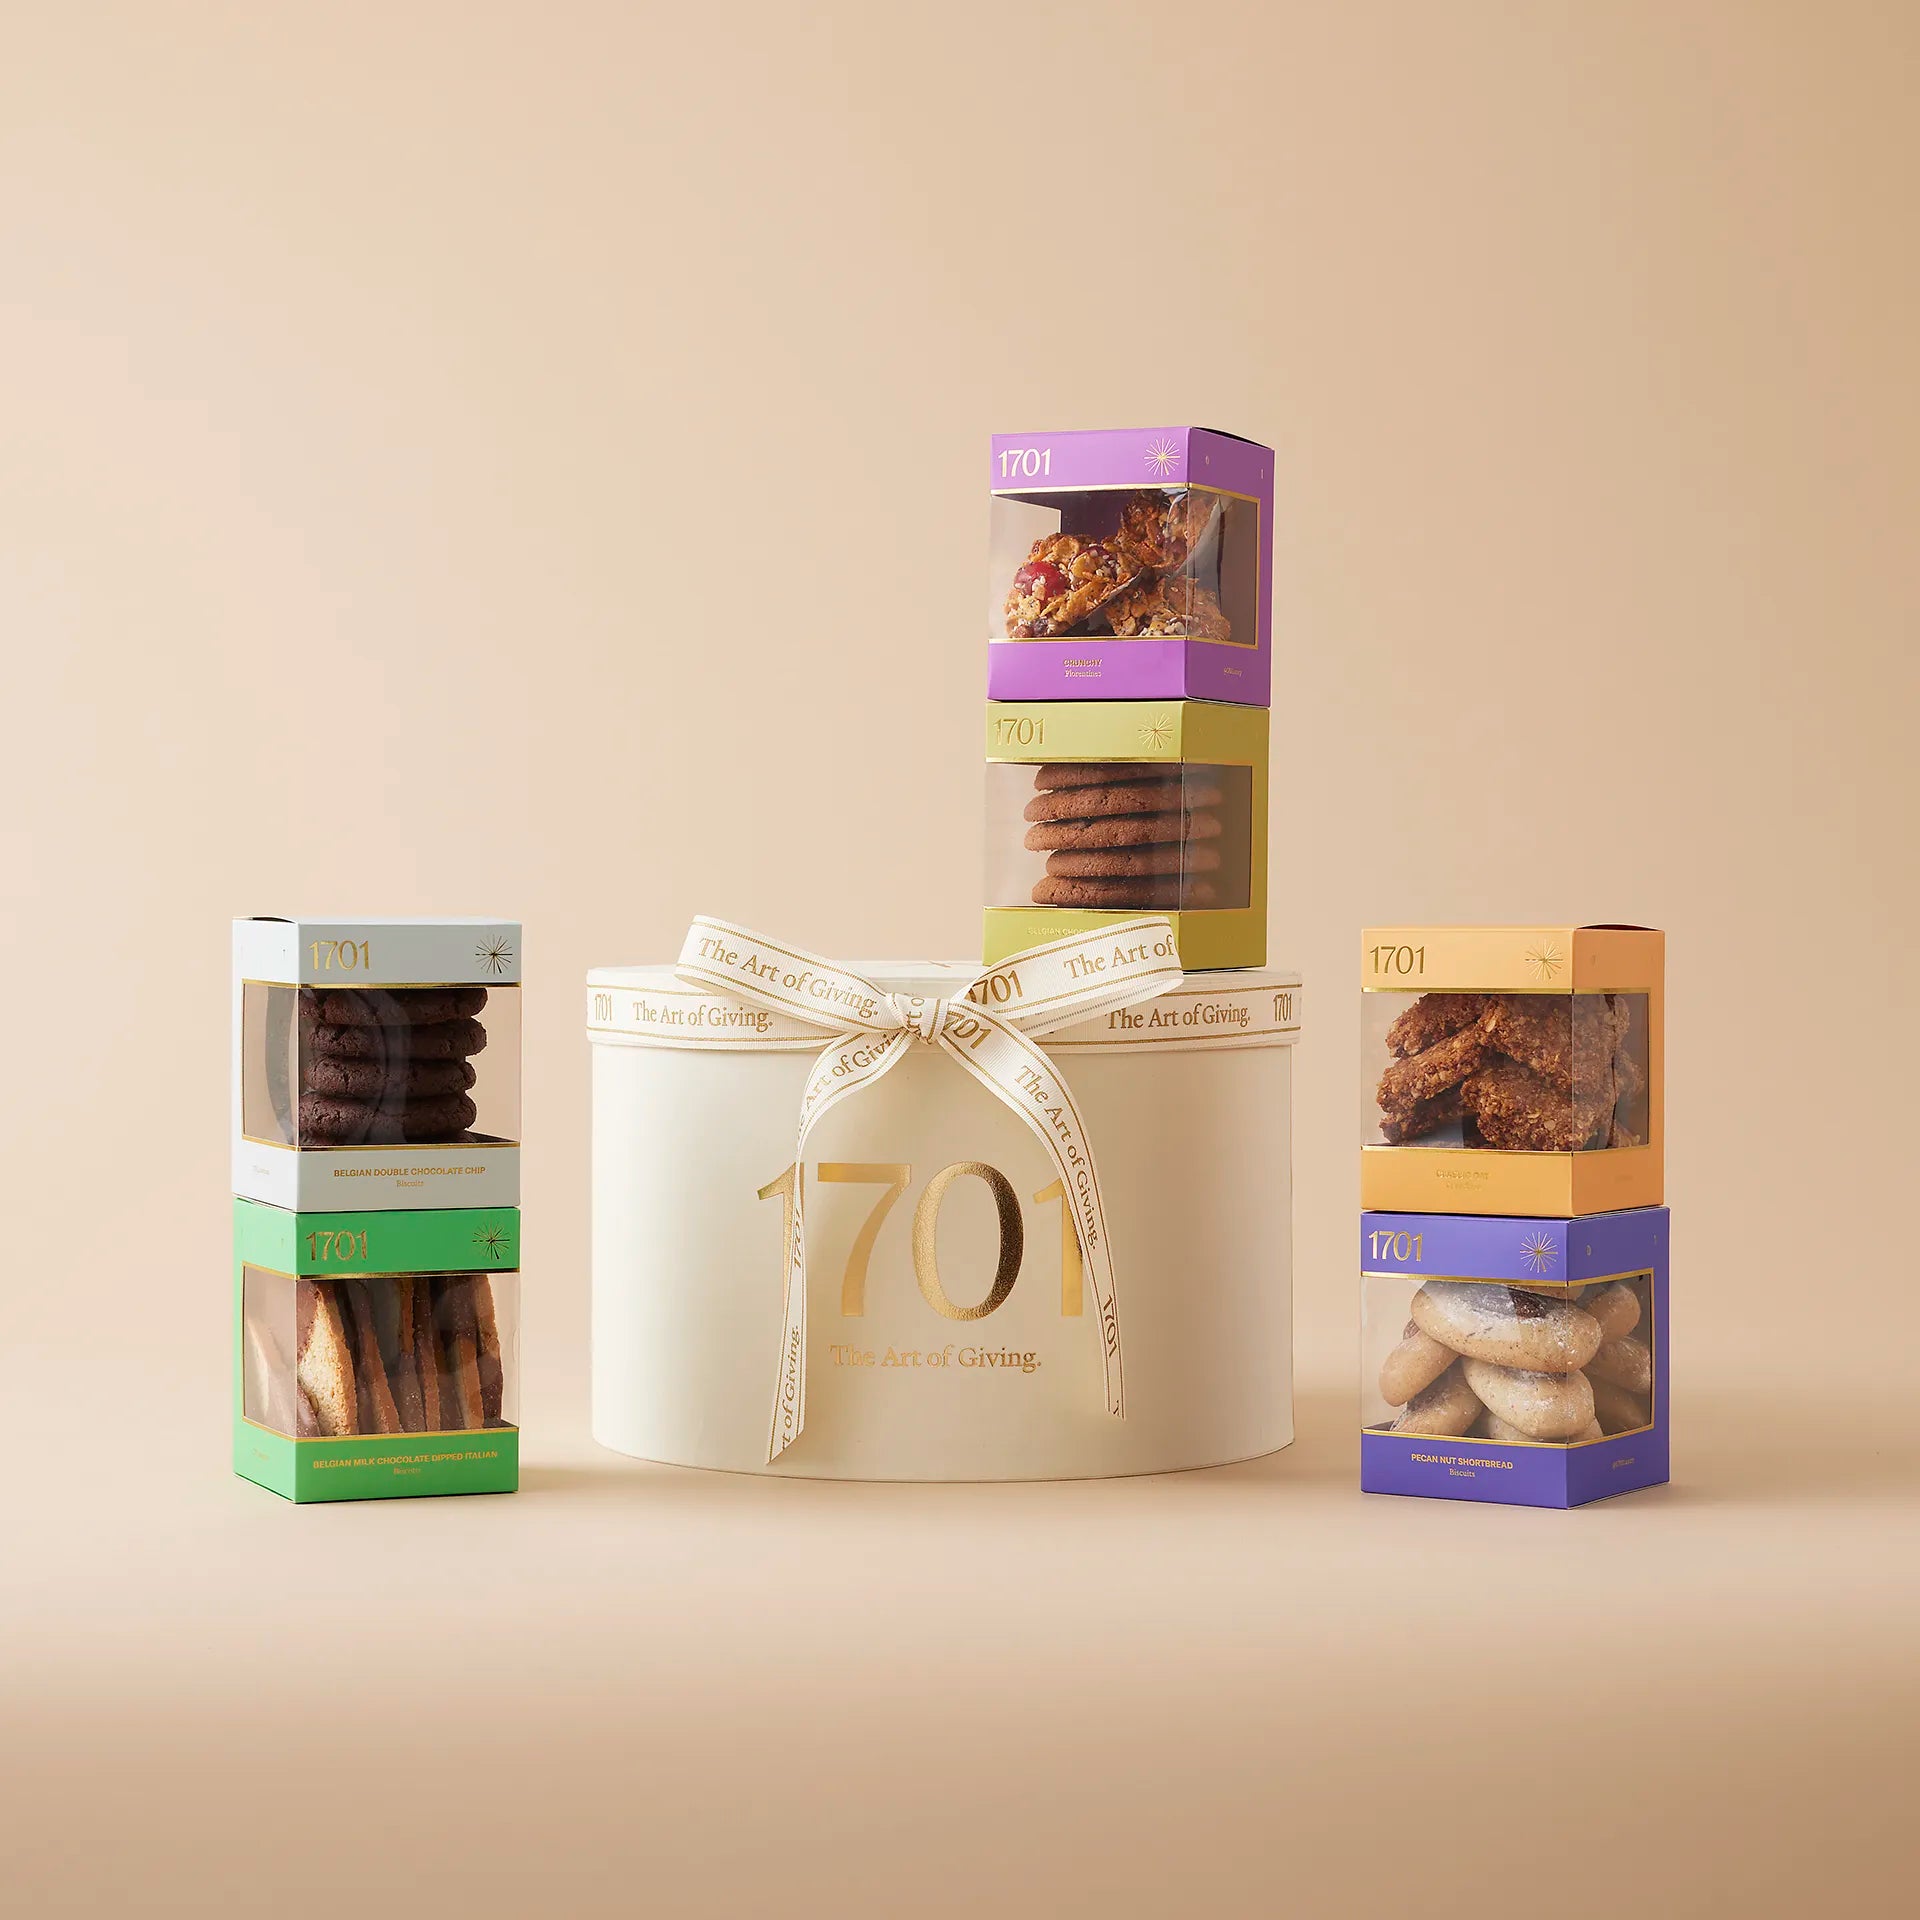 A gift box with an assortment of biscuits in different shapes, sizes, and flavors. The box is presented on a warm background and finished with a hand-tied ribbon, with the product label visible on the front of the box. Perfect for biscuit lovers who appreciate high-quality, handcrafted treats.